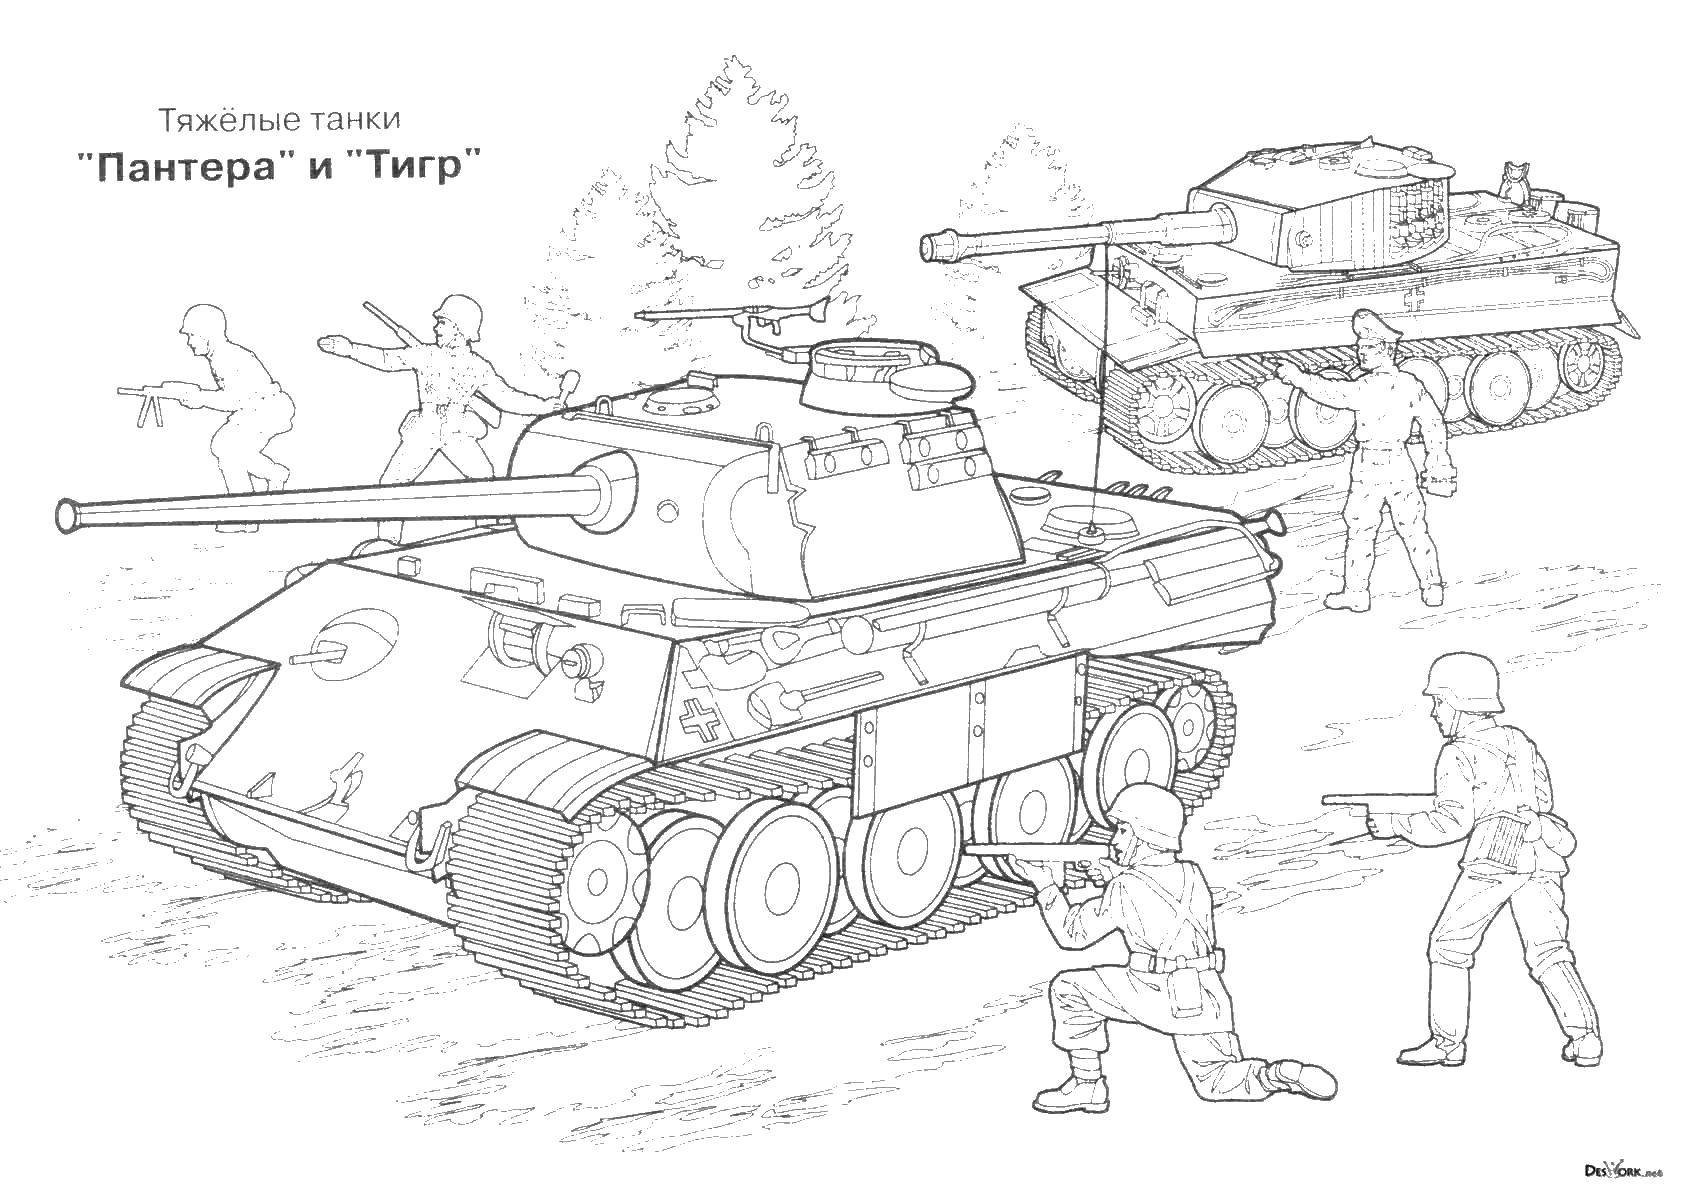 Coloring Tanks. Category military. Tags:  Tanks.